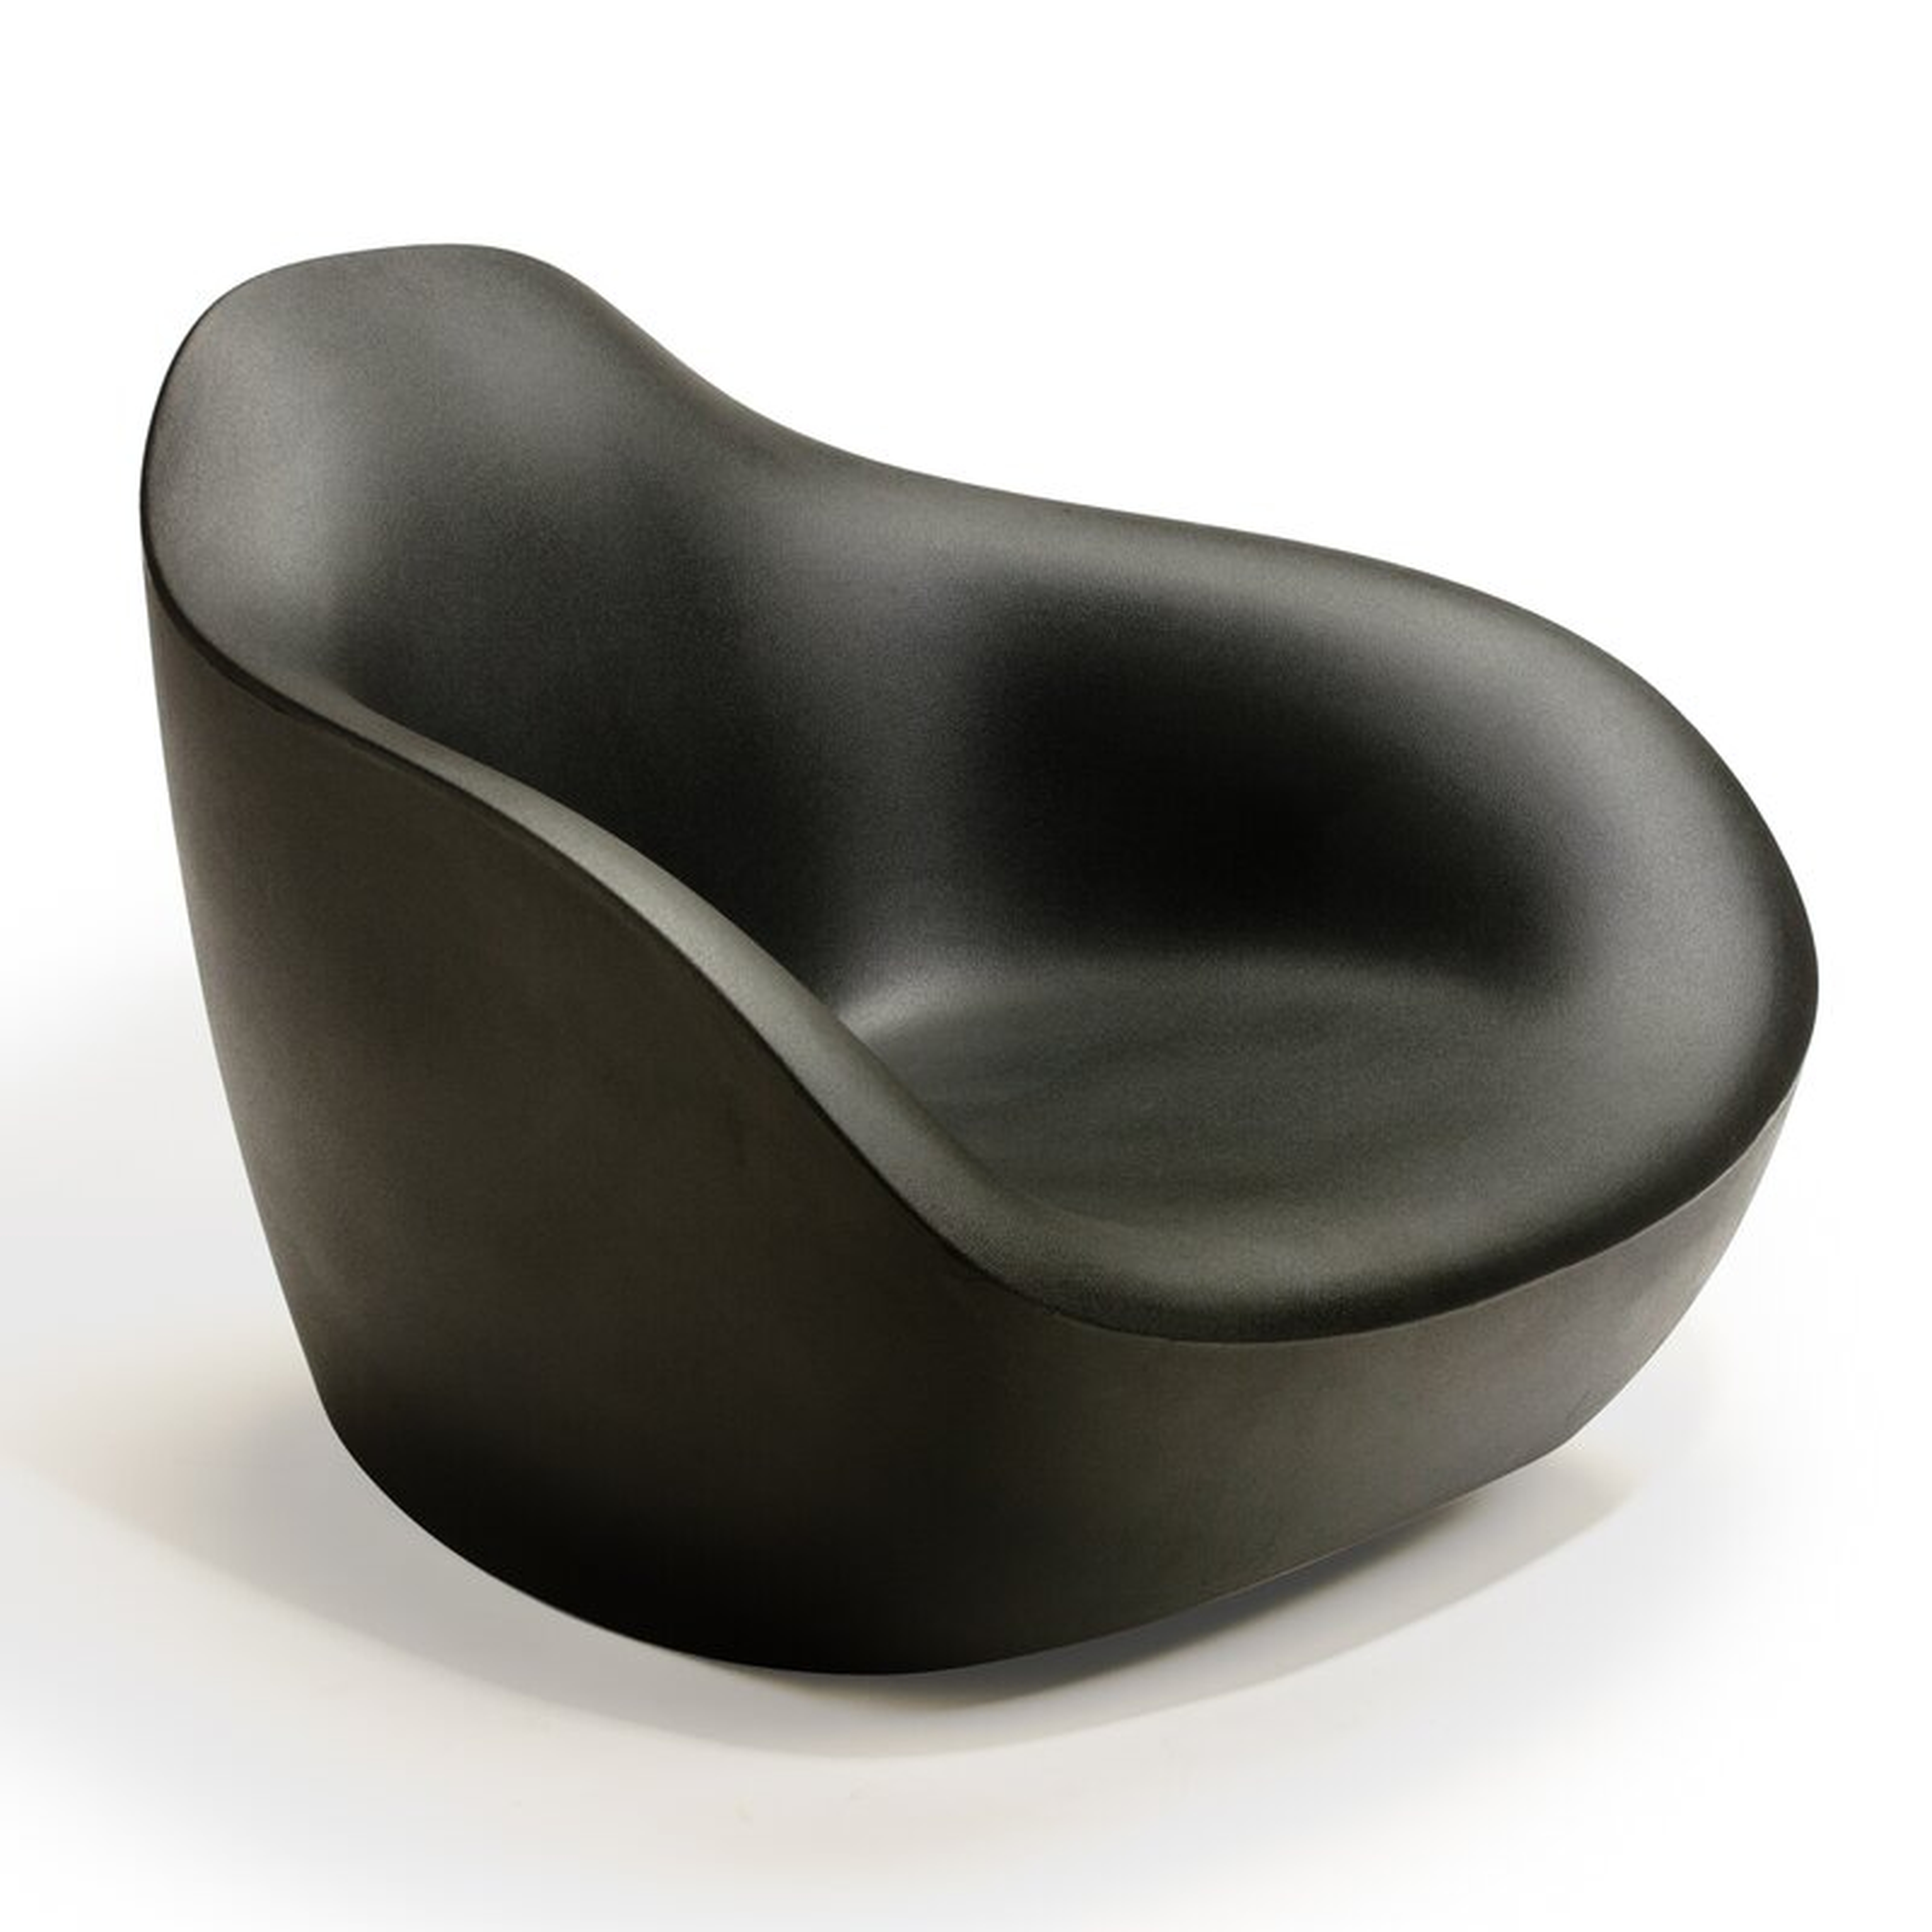 Lounge Chair Upholstery Color: Black - Perigold